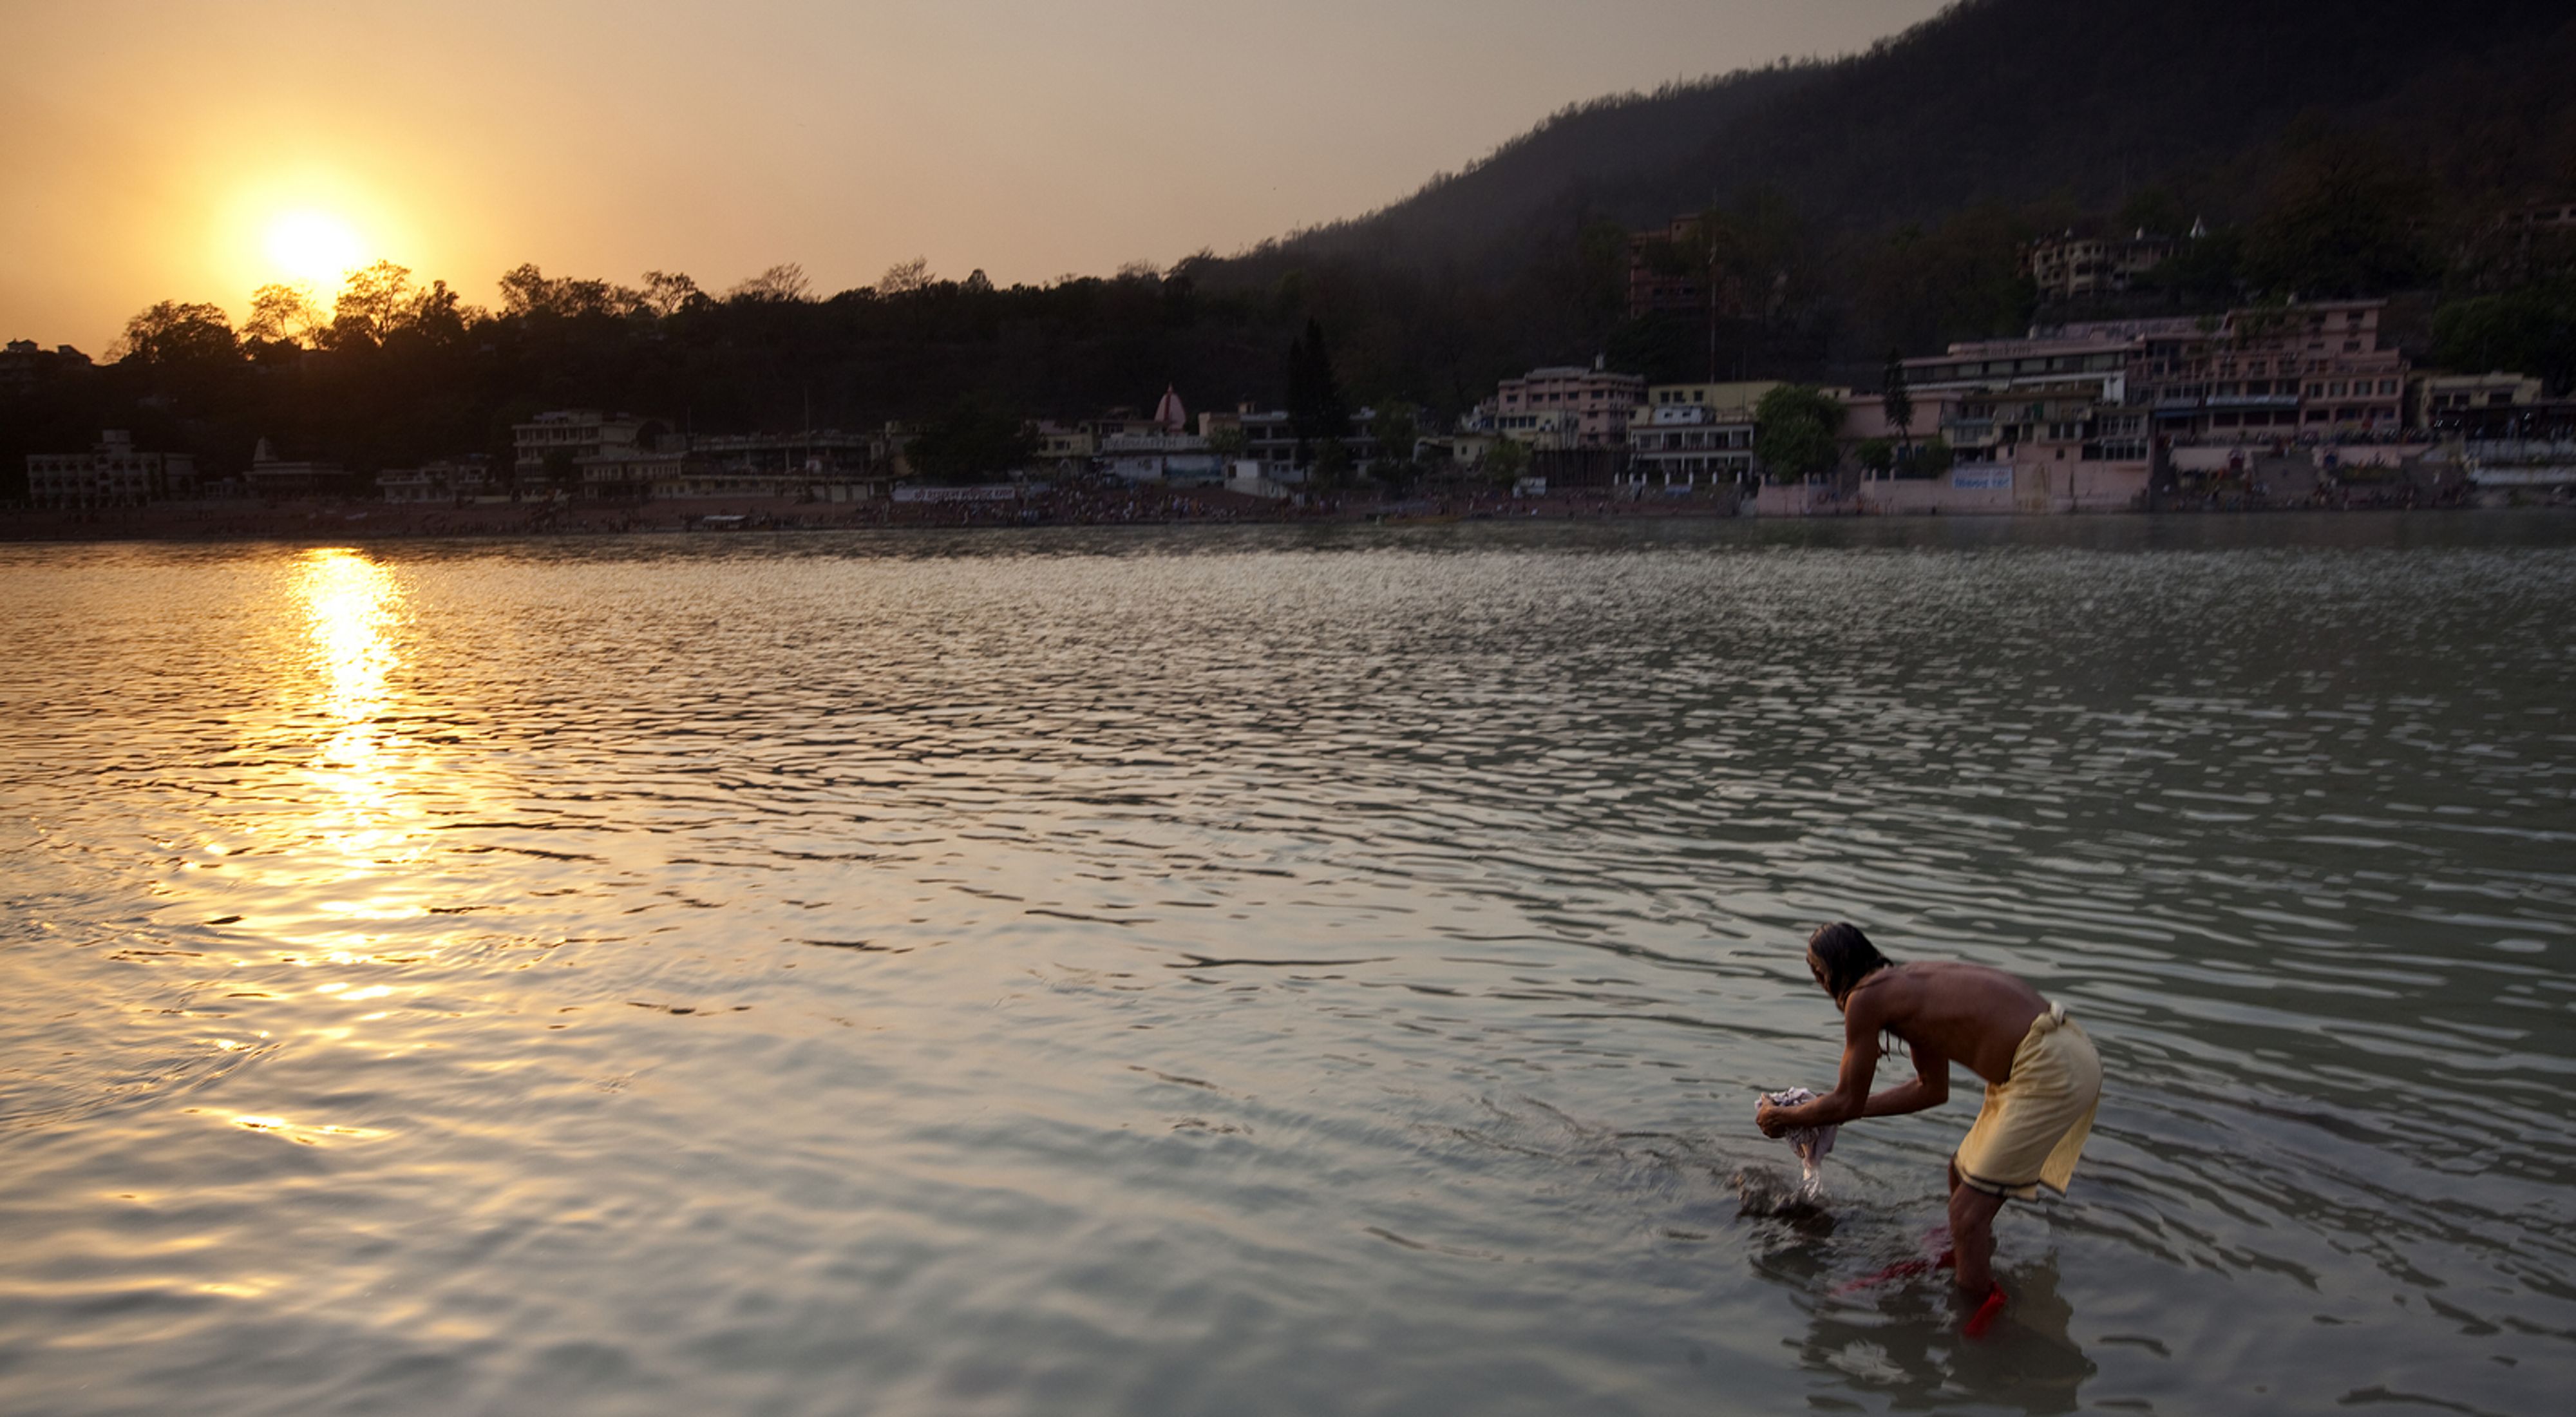 In Rishikesh, India, pilgrims bathe and gather at the Ganges River as part of the Kumbh Mela gathering.